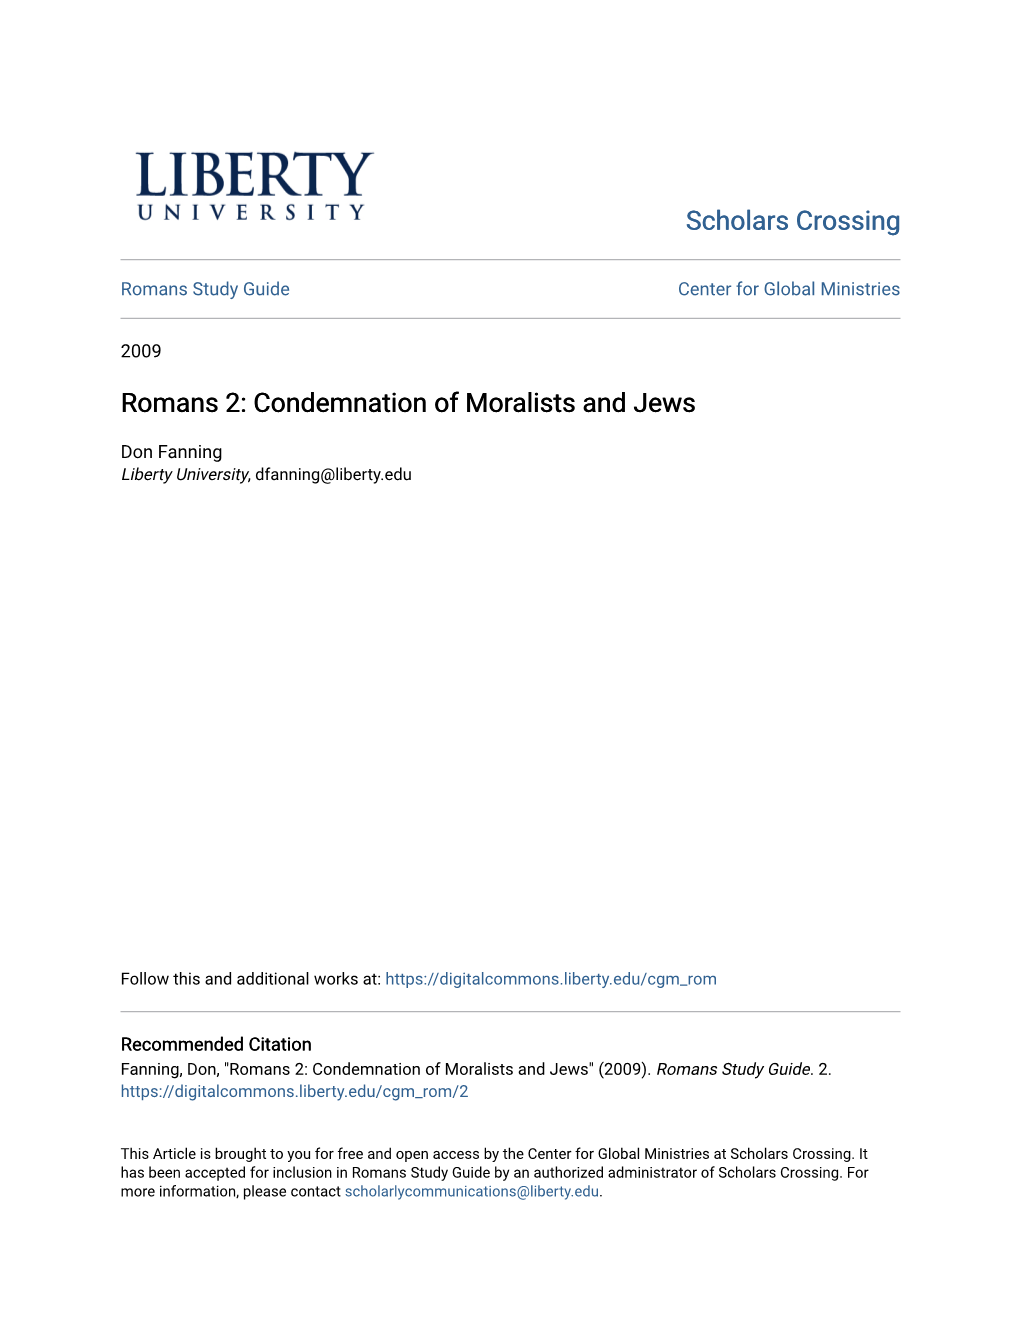 Romans 2: Condemnation of Moralists and Jews